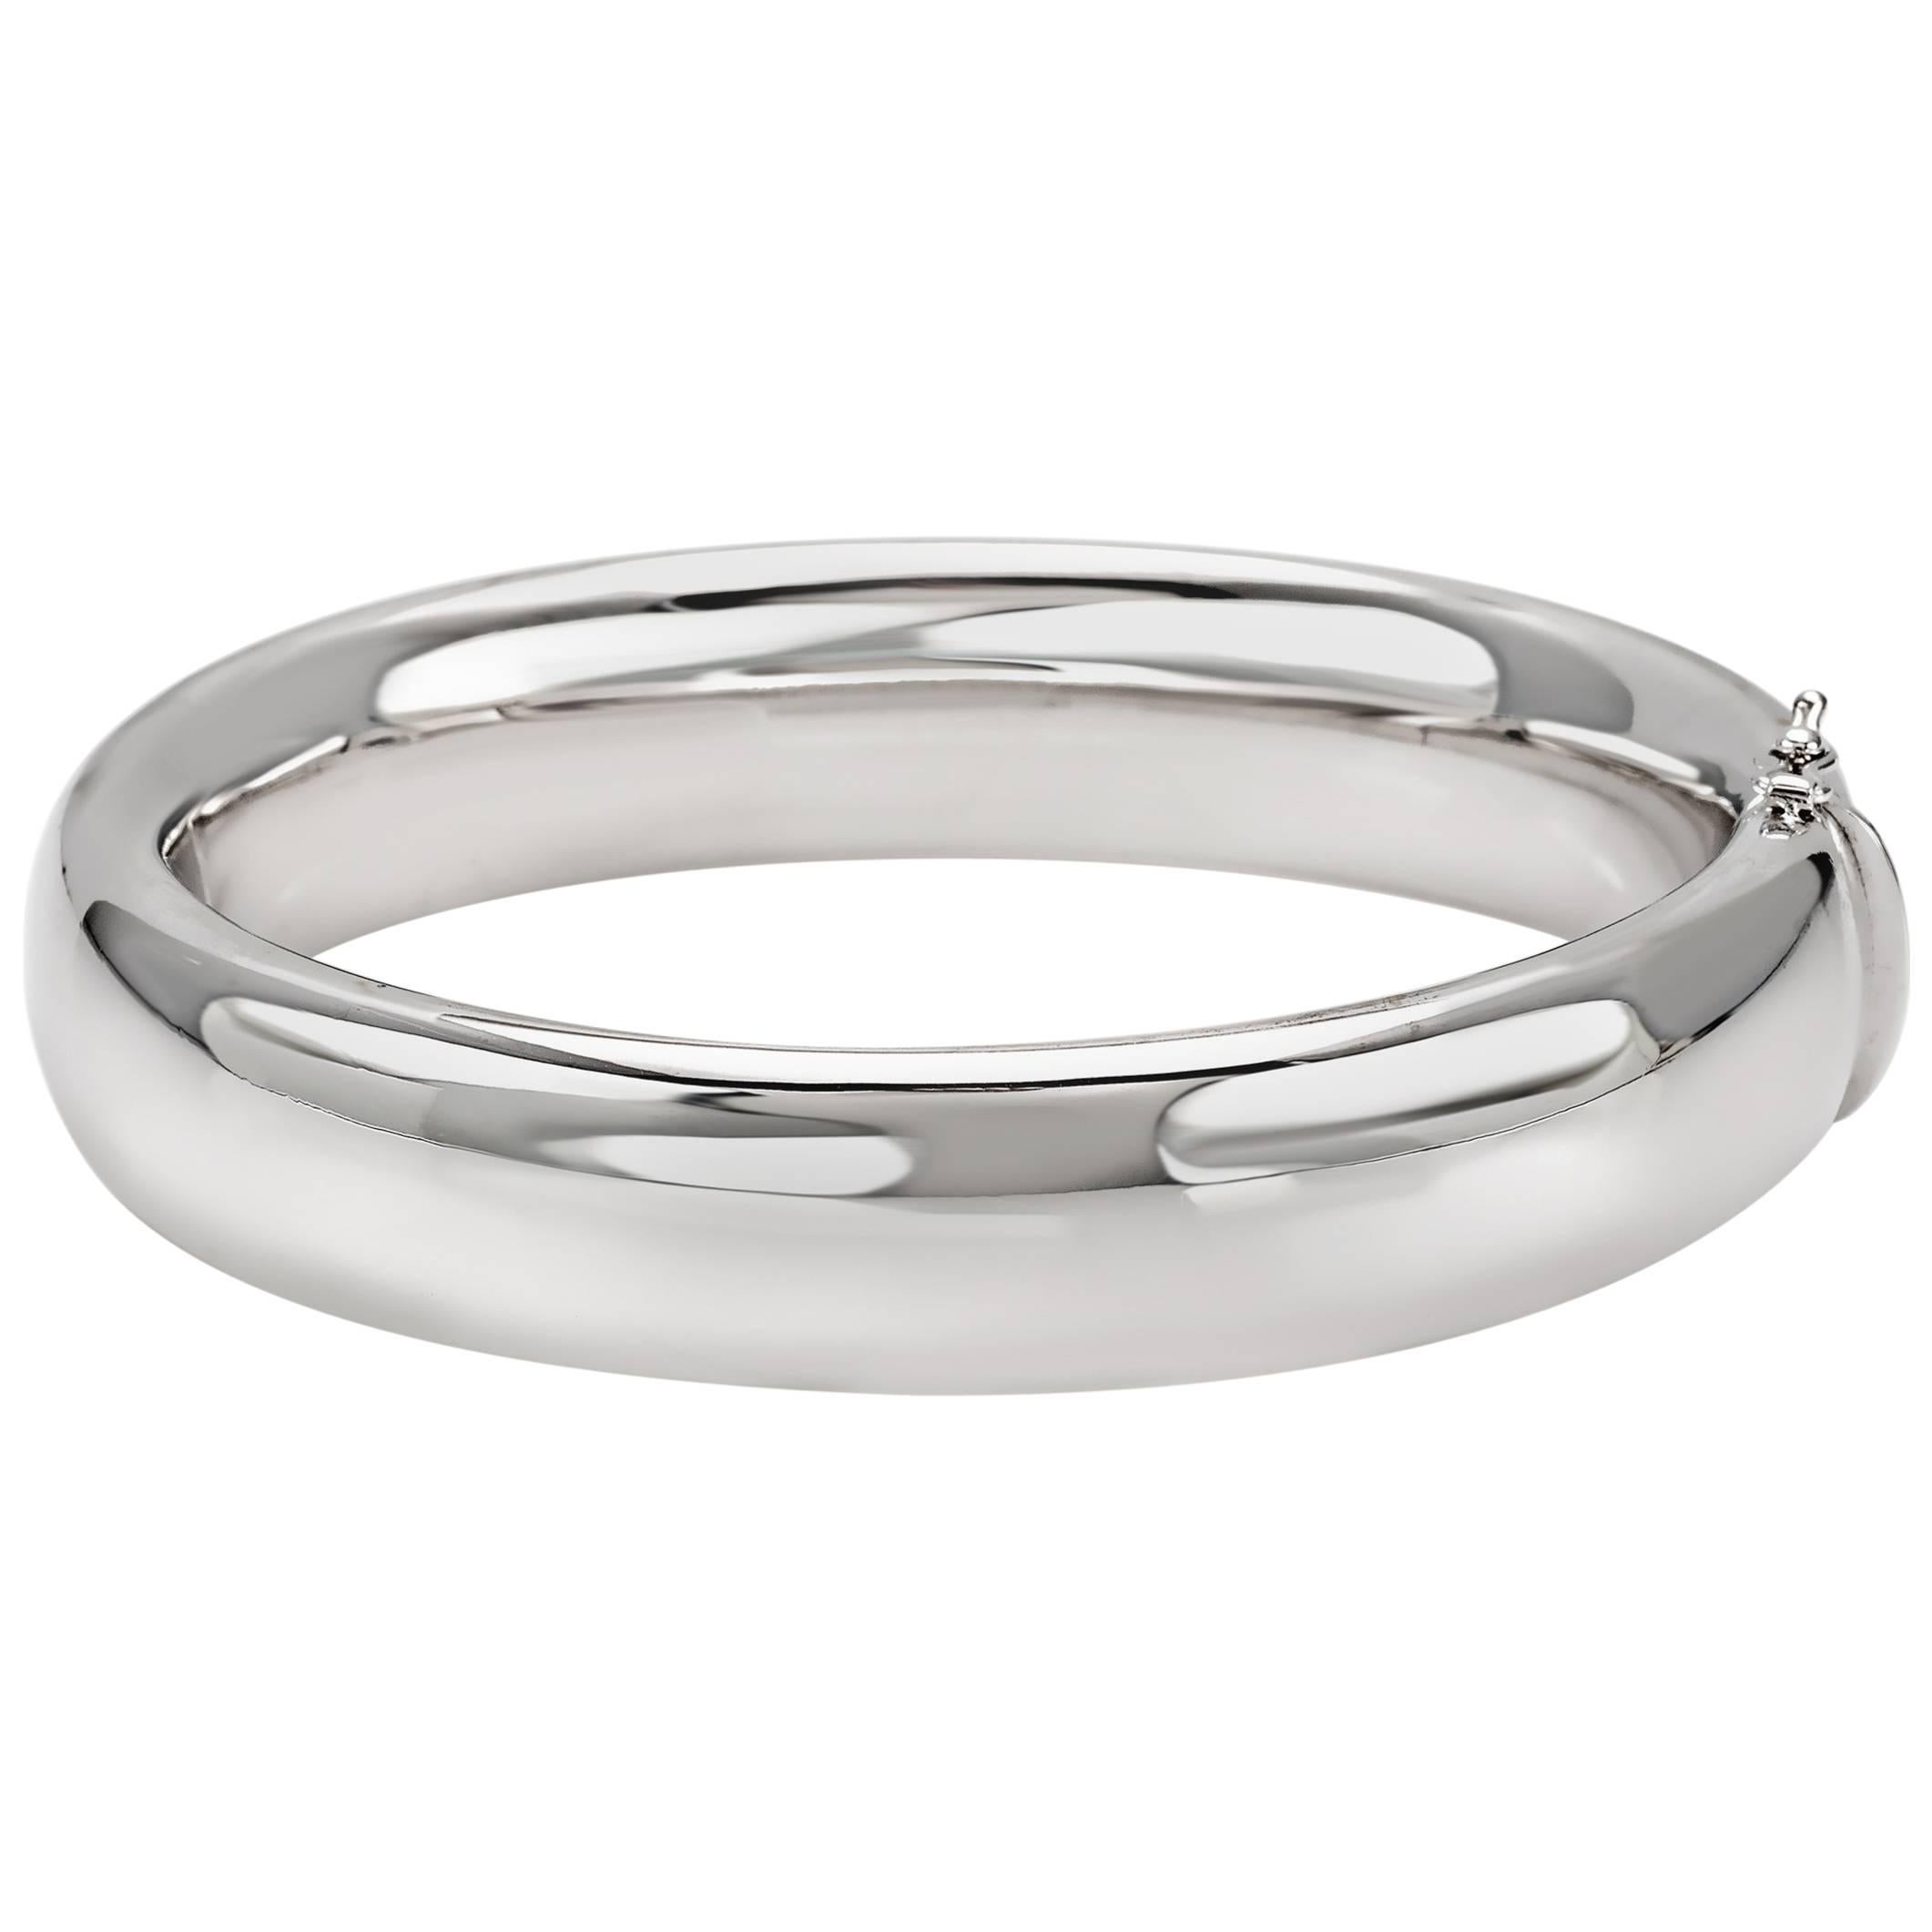 Bangle from the Collection "Essence" 18 Karat White Gold For Sale